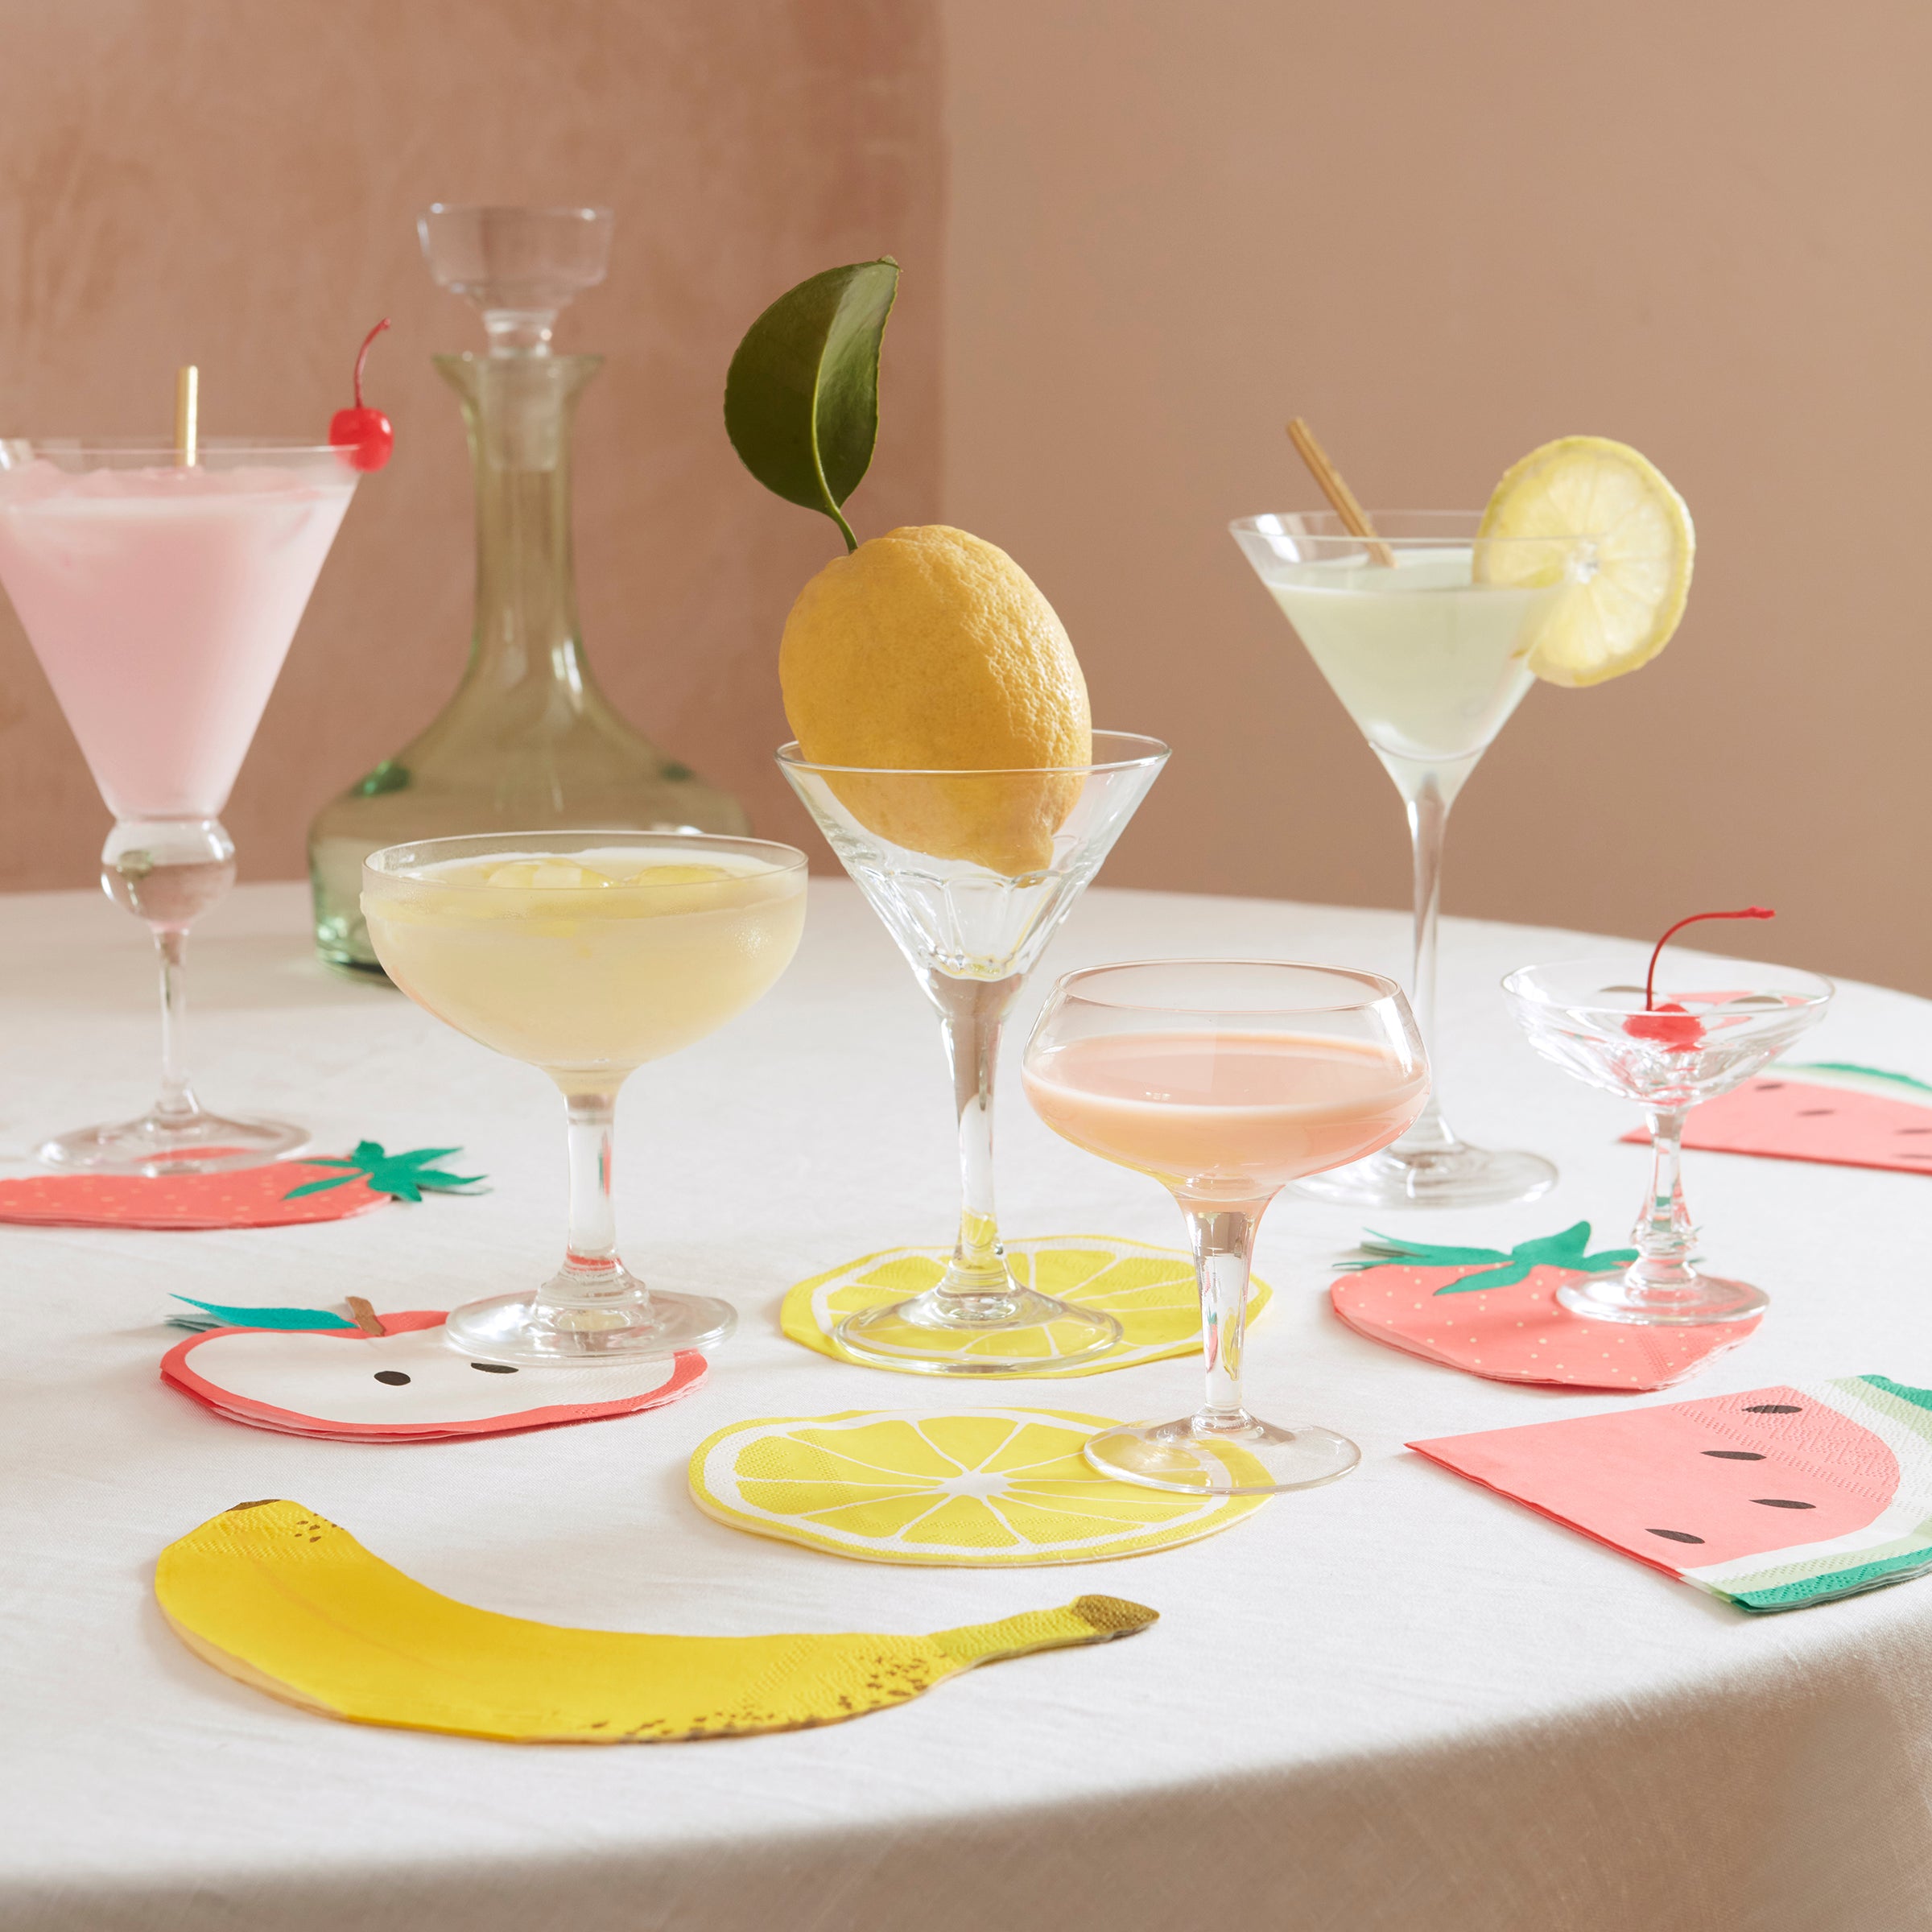 Our party napkins, designed to look like ripe strawberries, are ideal to make any party look summery.